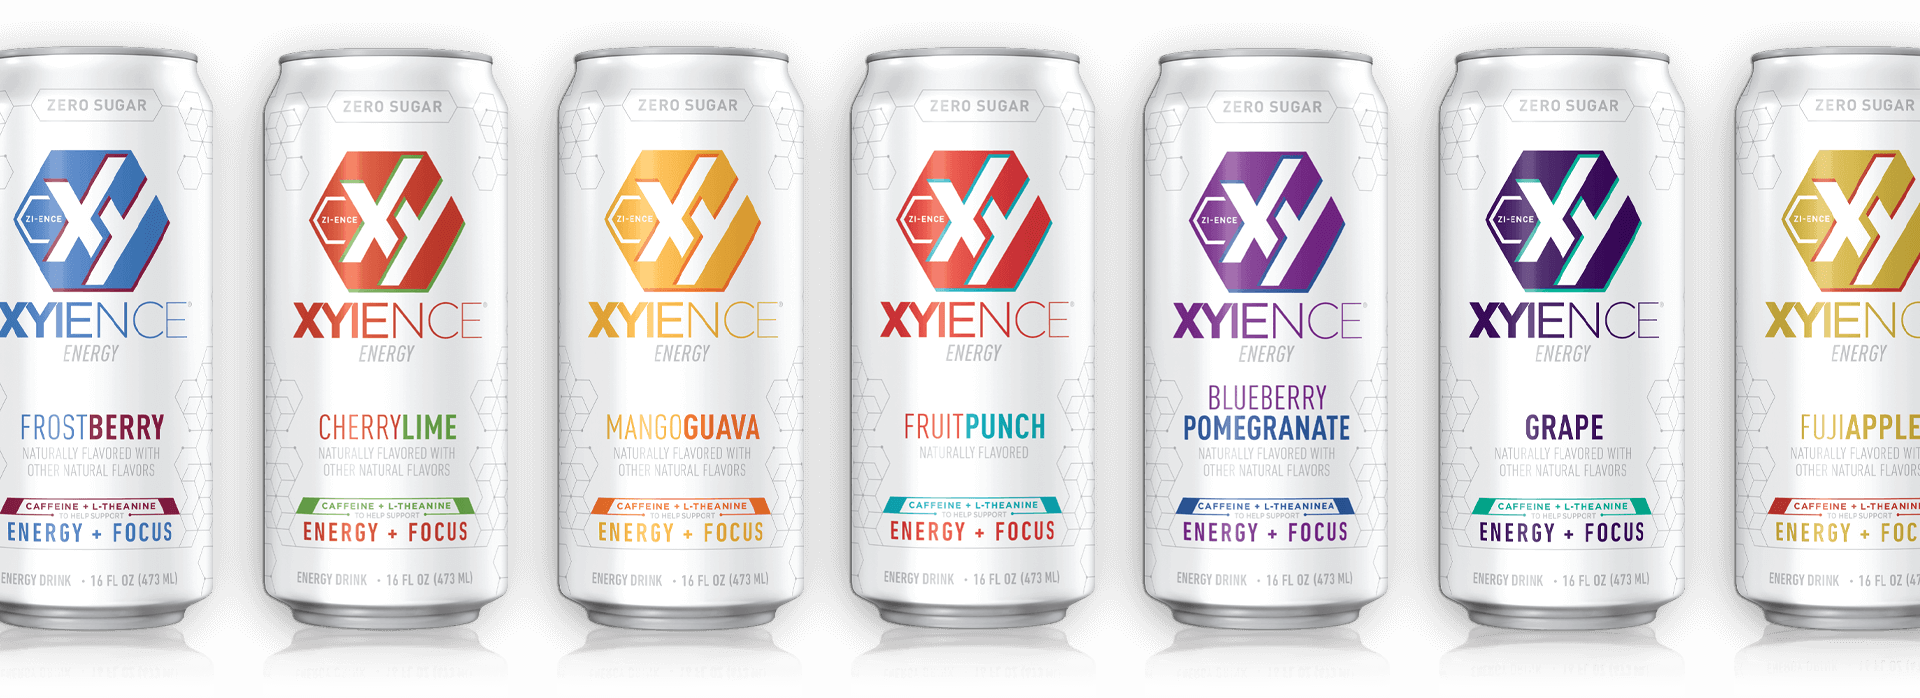 Xyience Flavors Can Lineup